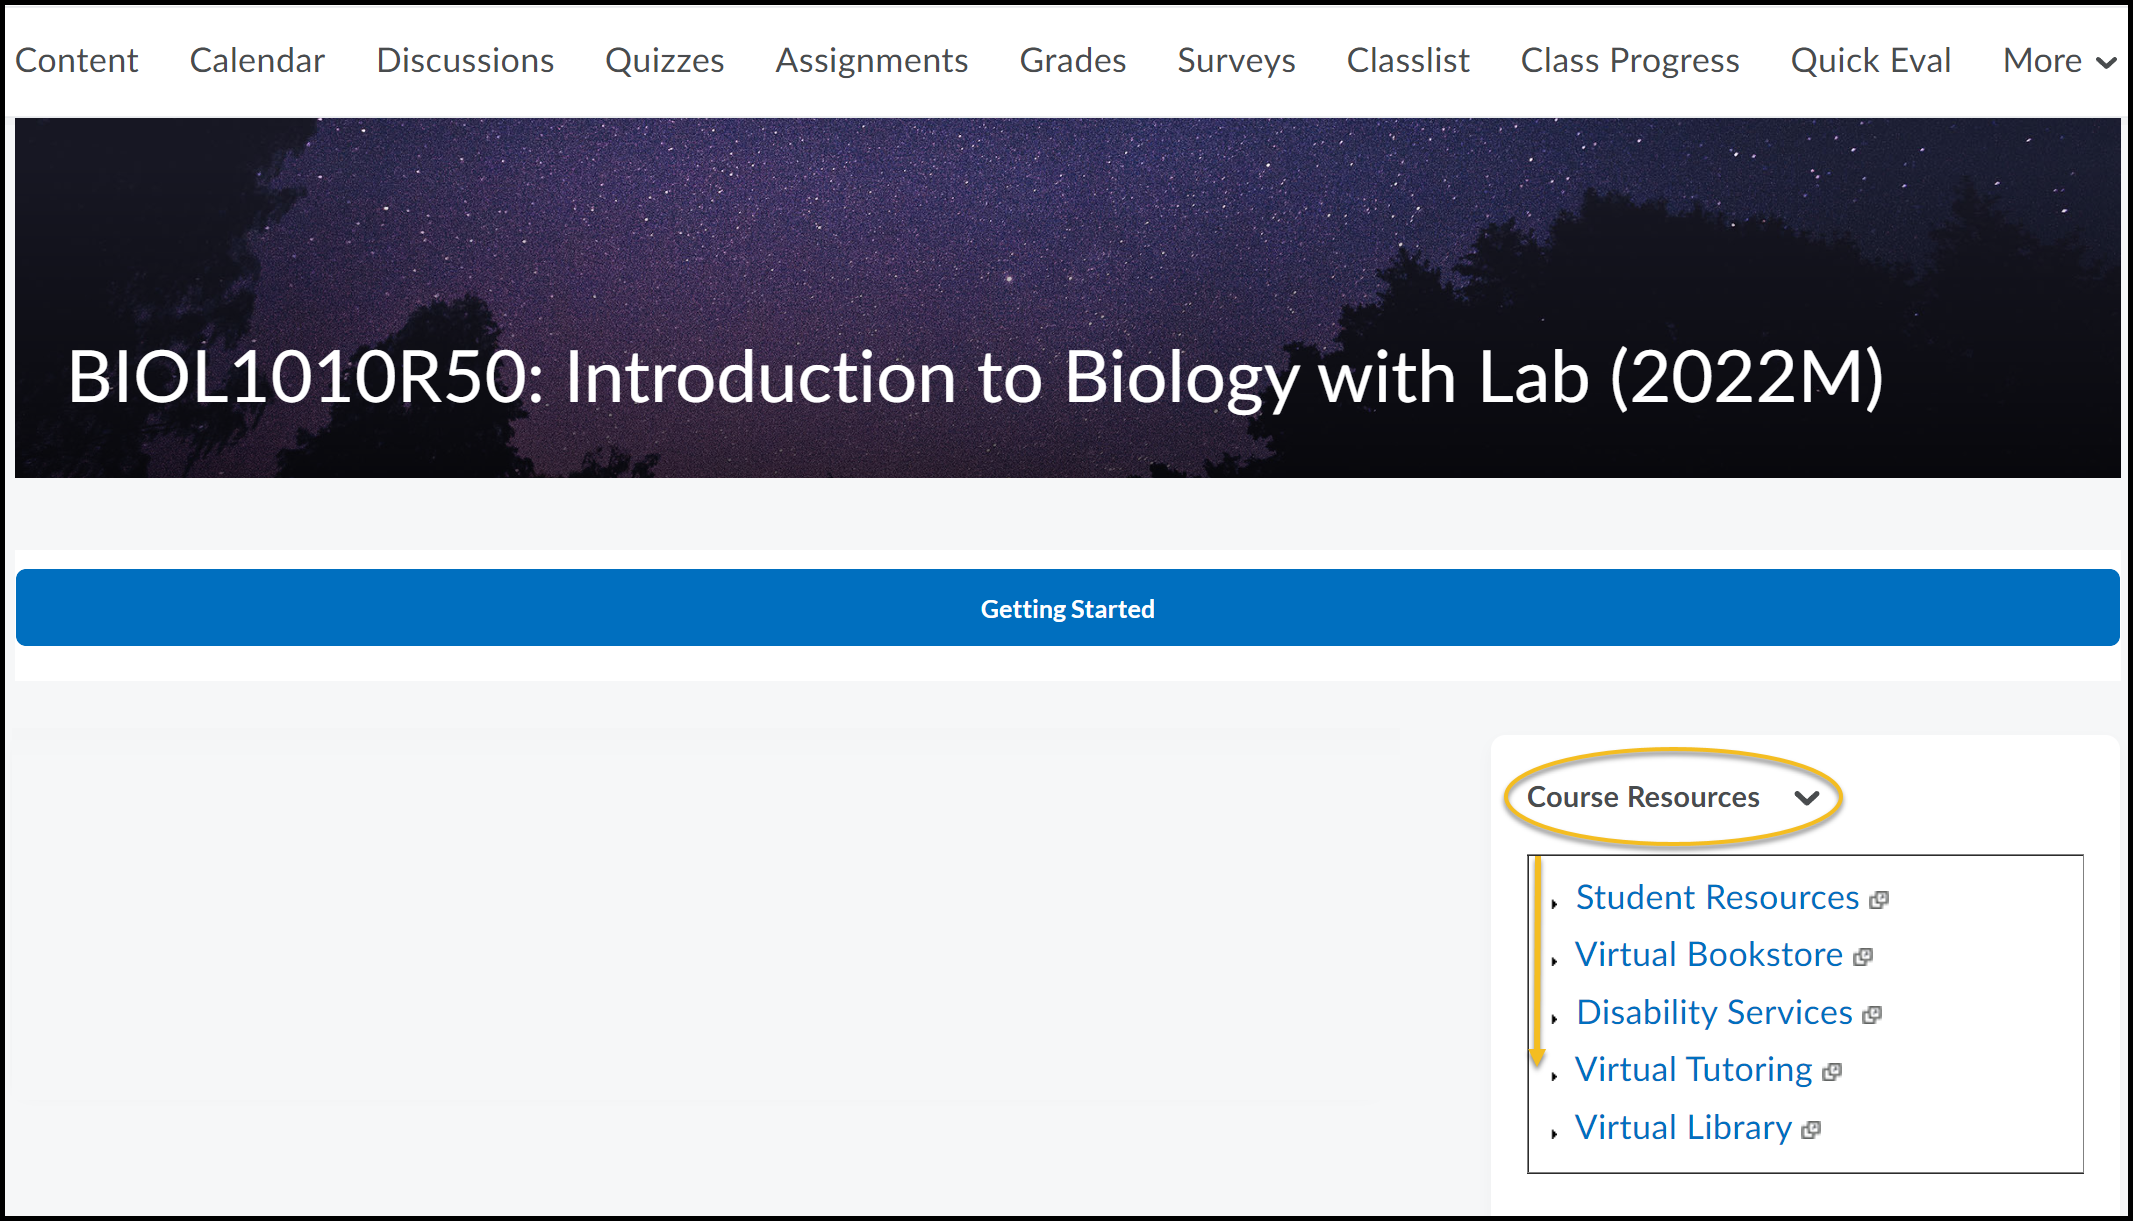 Course Resources highlighted from course homepage including Virtual Tutoring.